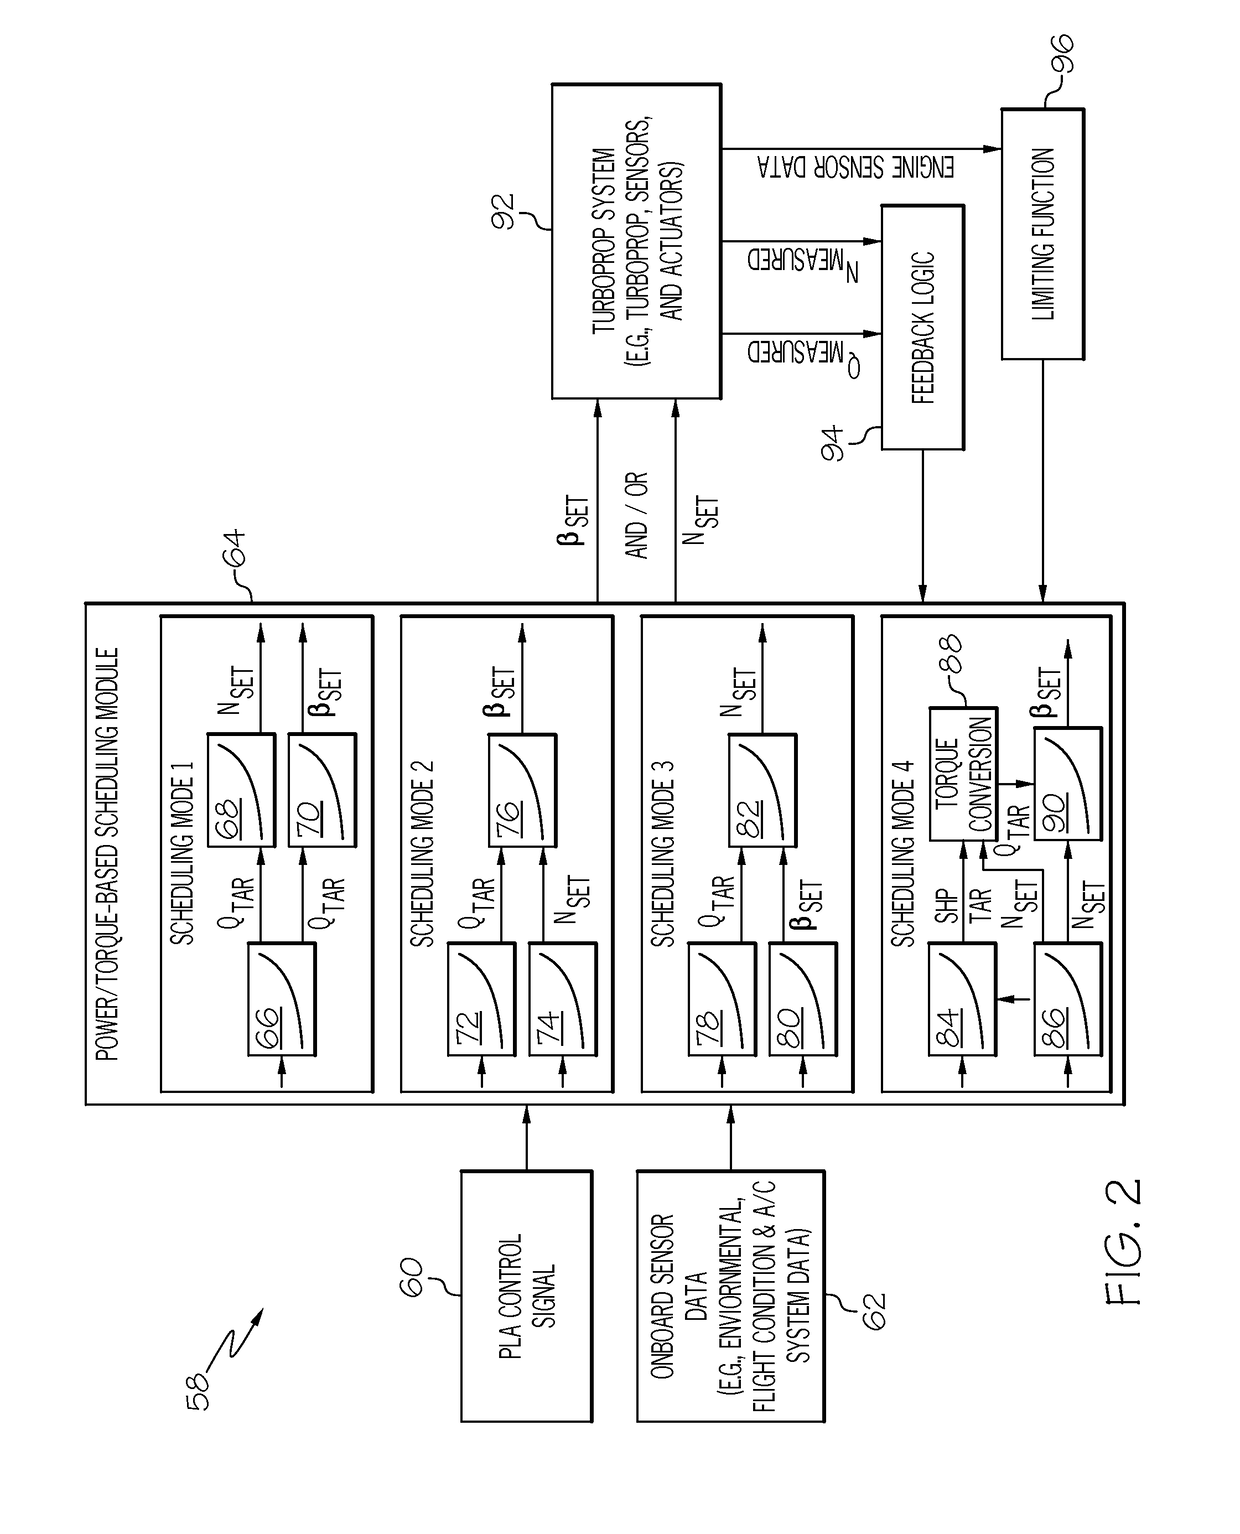 Single lever turboprop control systems and methods utilizing torque-based and power-based scheduling